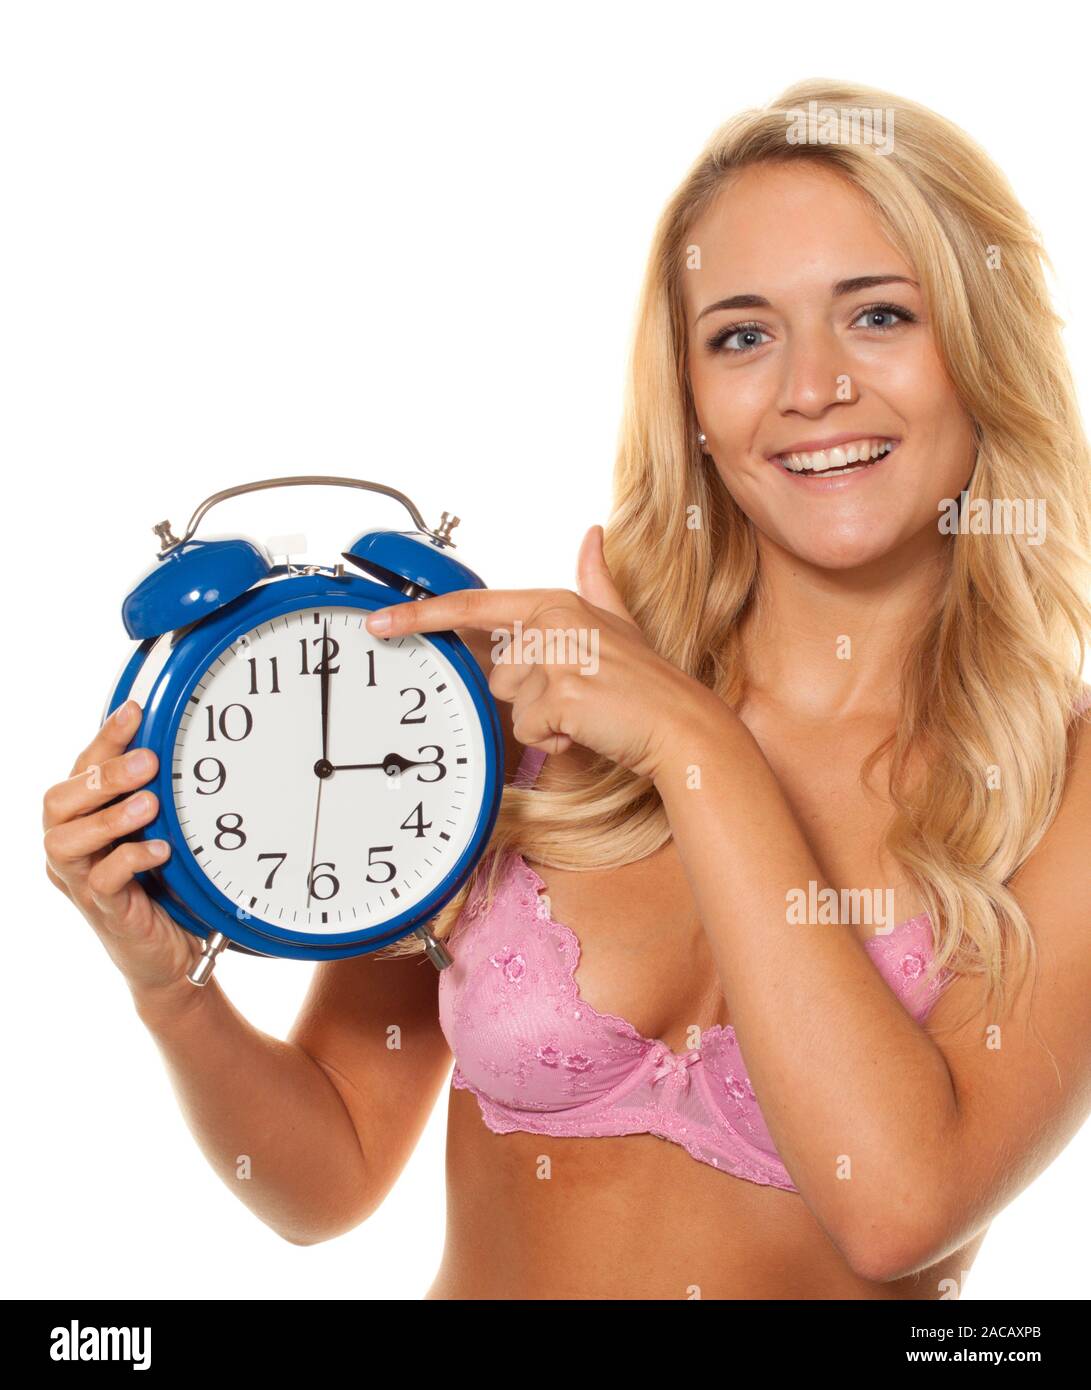 Time change, clock change winter summer time Stock Photo